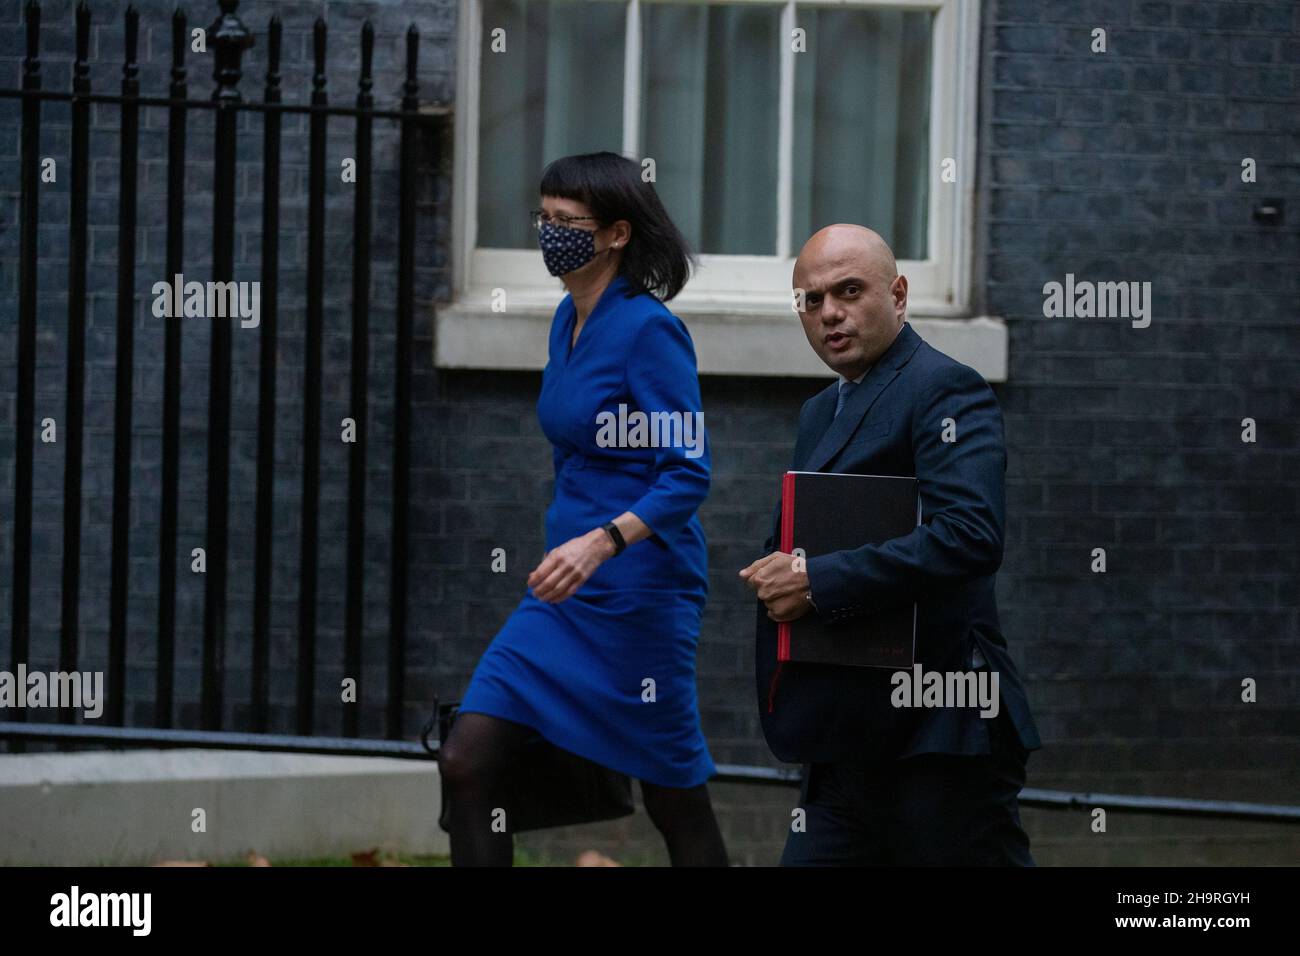 LONDON, UK 8TH DECEMBER 2021. Sajid Javid the Secretary of State for Health and Social Care and Jenny Harries the Deputy Chief Medical Officer arrives at 10 Downing Street ahead of Covid-19 briefing Credit: Lucy North/Alamy Live News Stock Photo